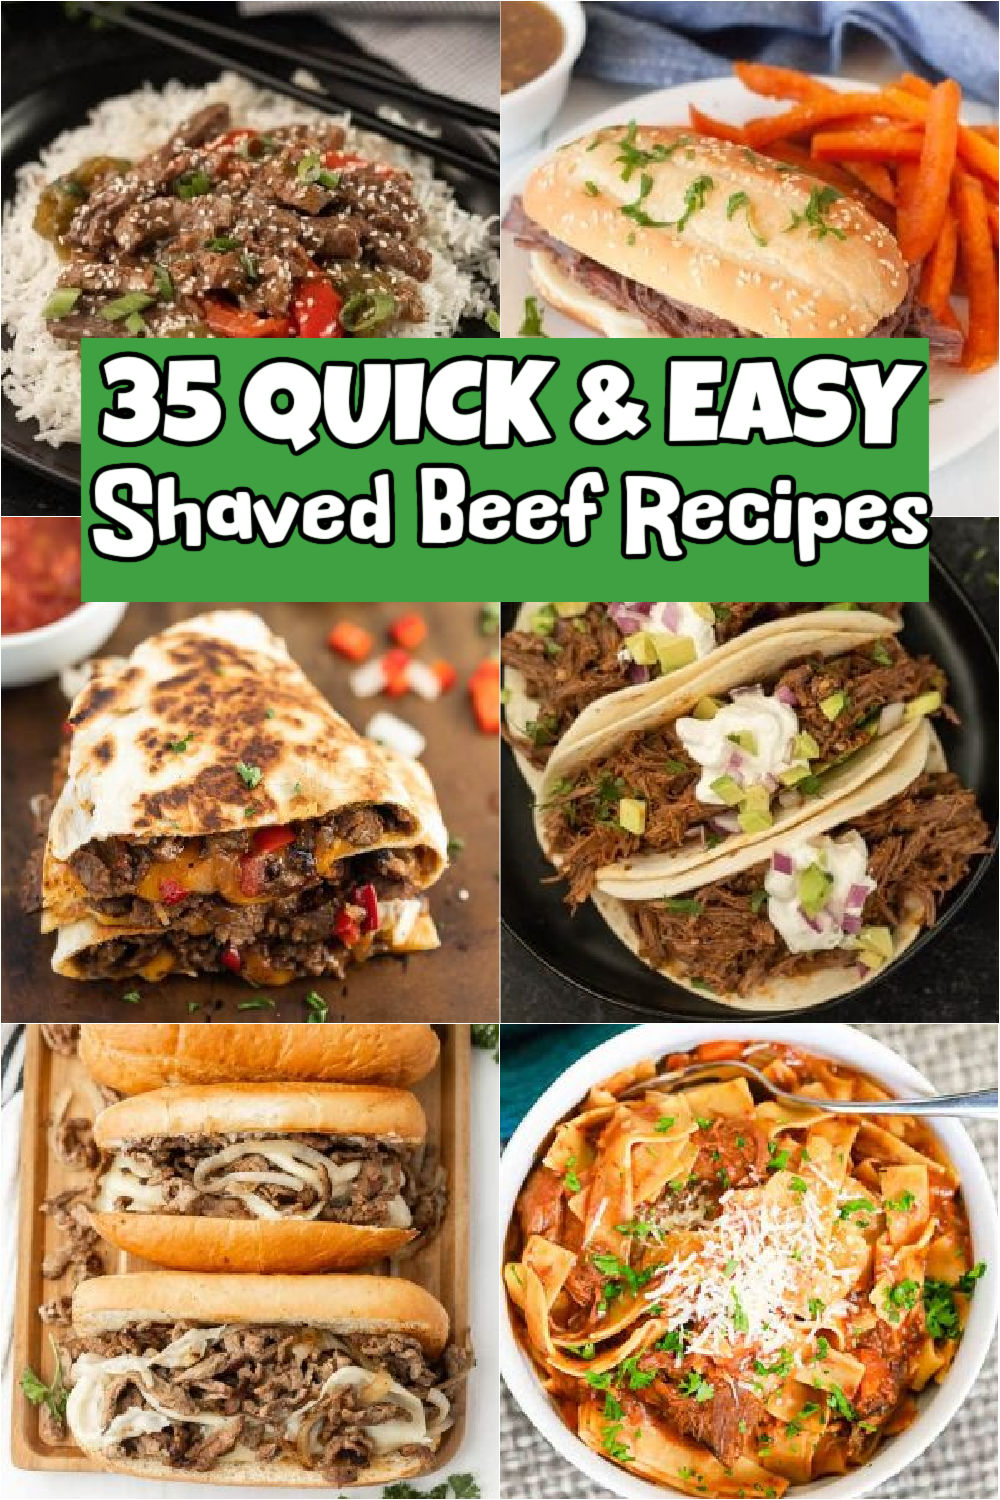 The best recipes with shaved beef that are easy to prepare for dinner and so delicious. 35 shaved beef recipes including steak sandwiches, crockpot recipes and even healthy keto options, #eatingonadime #shavedbeefrecipes #beefrecipes